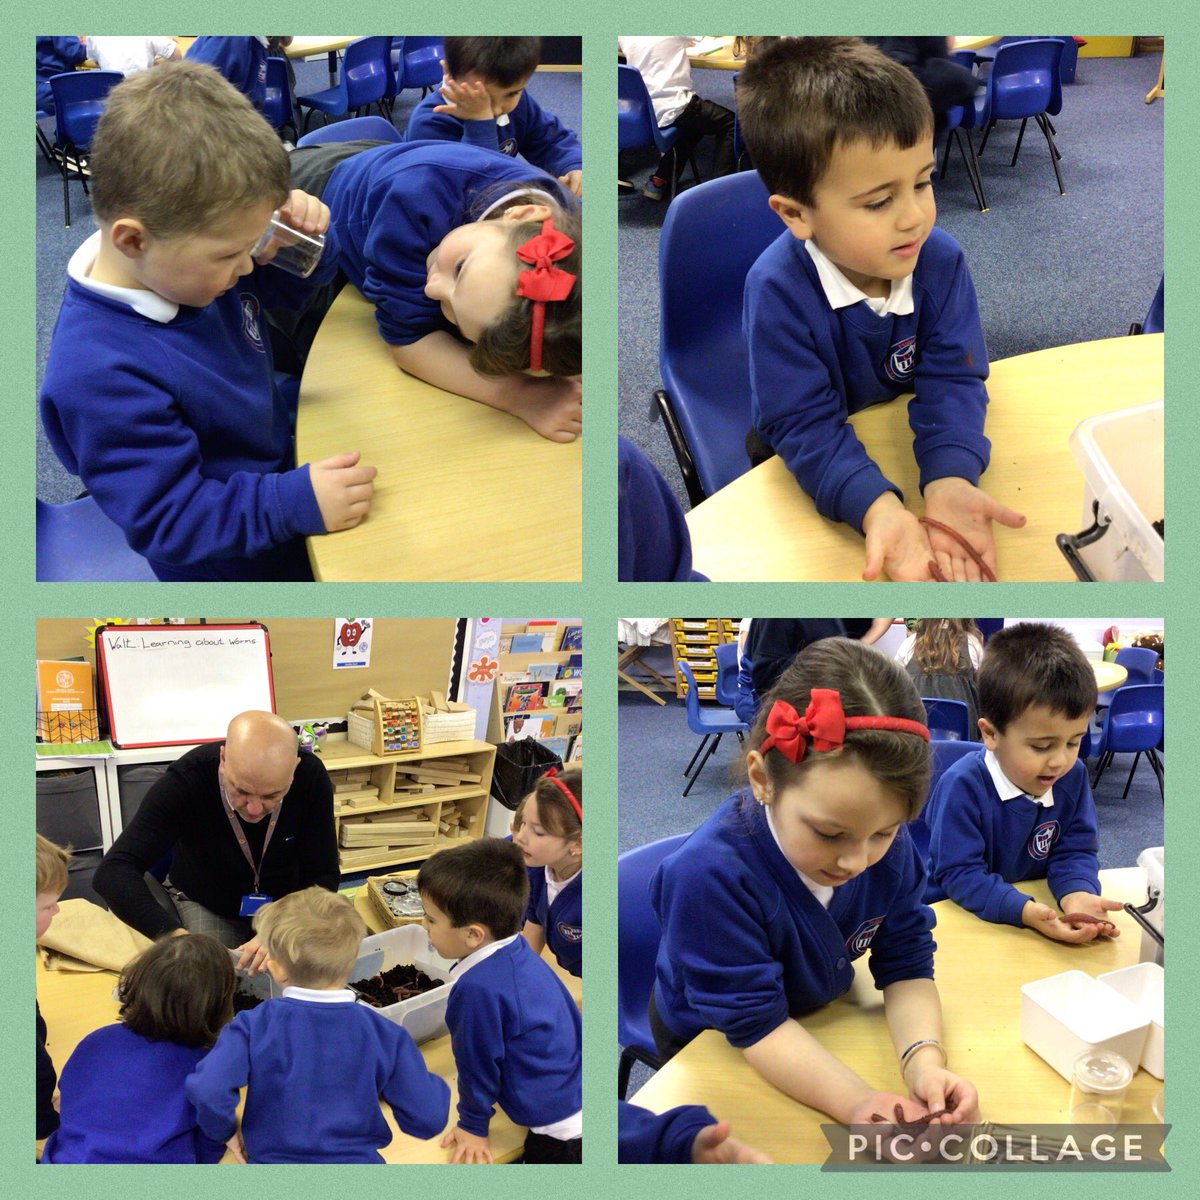 Finding out lots of worm facts today in dosbarth Roald Dahl. 🪱🍂We know about segments, habitats, and lots more. Thank you @dps_waters for bringing them into class today. We are #EthicalInformedCitizens @DeightonPrimary @DPSWitcombe 🤩⭐️